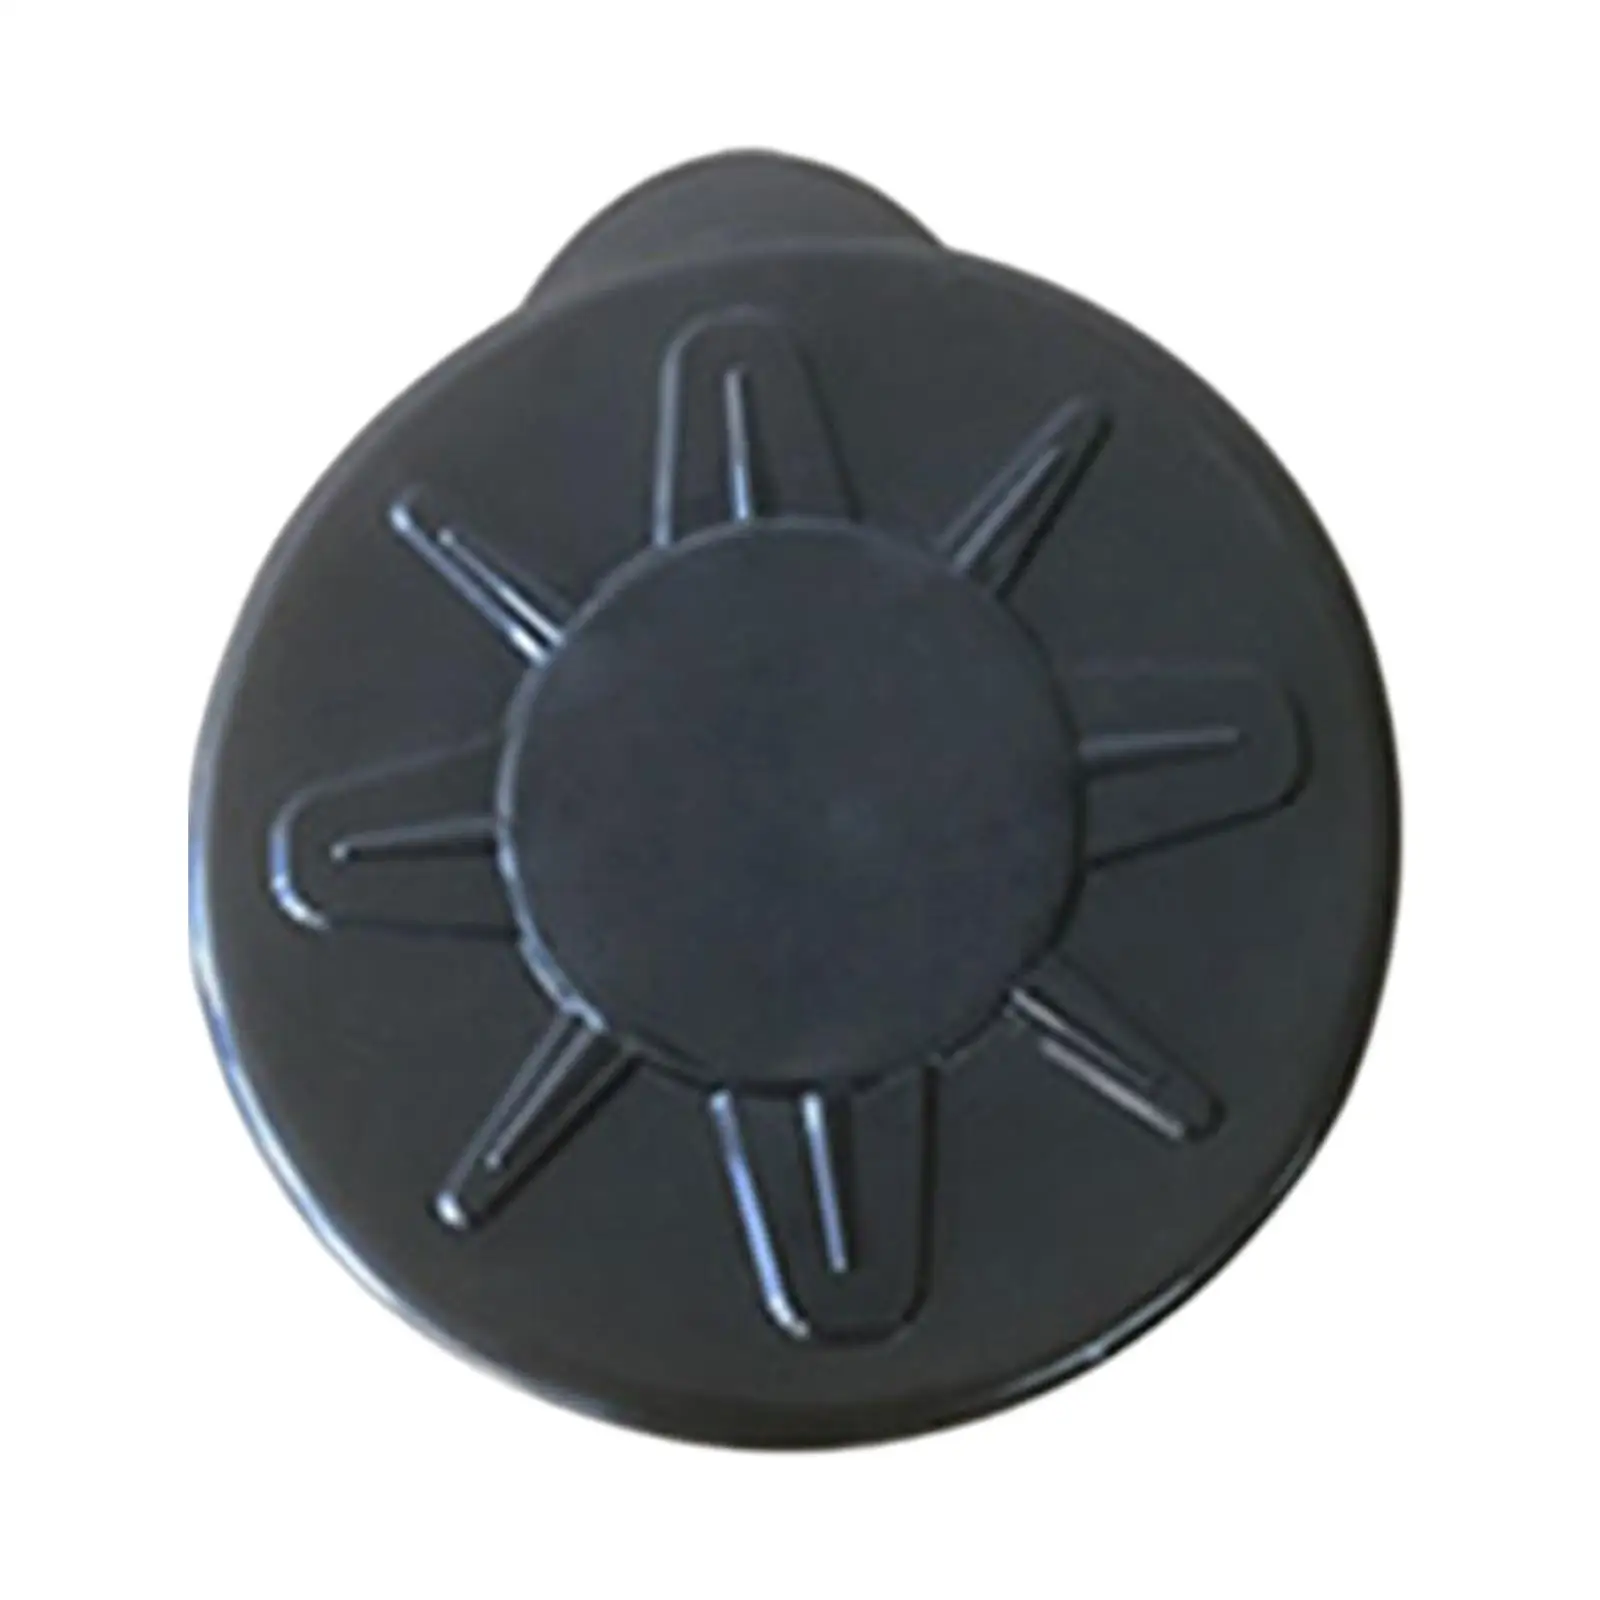 Kayak Hatches Sealing Hatch 9 inch Access Hatch Parts Replacement Hatches for